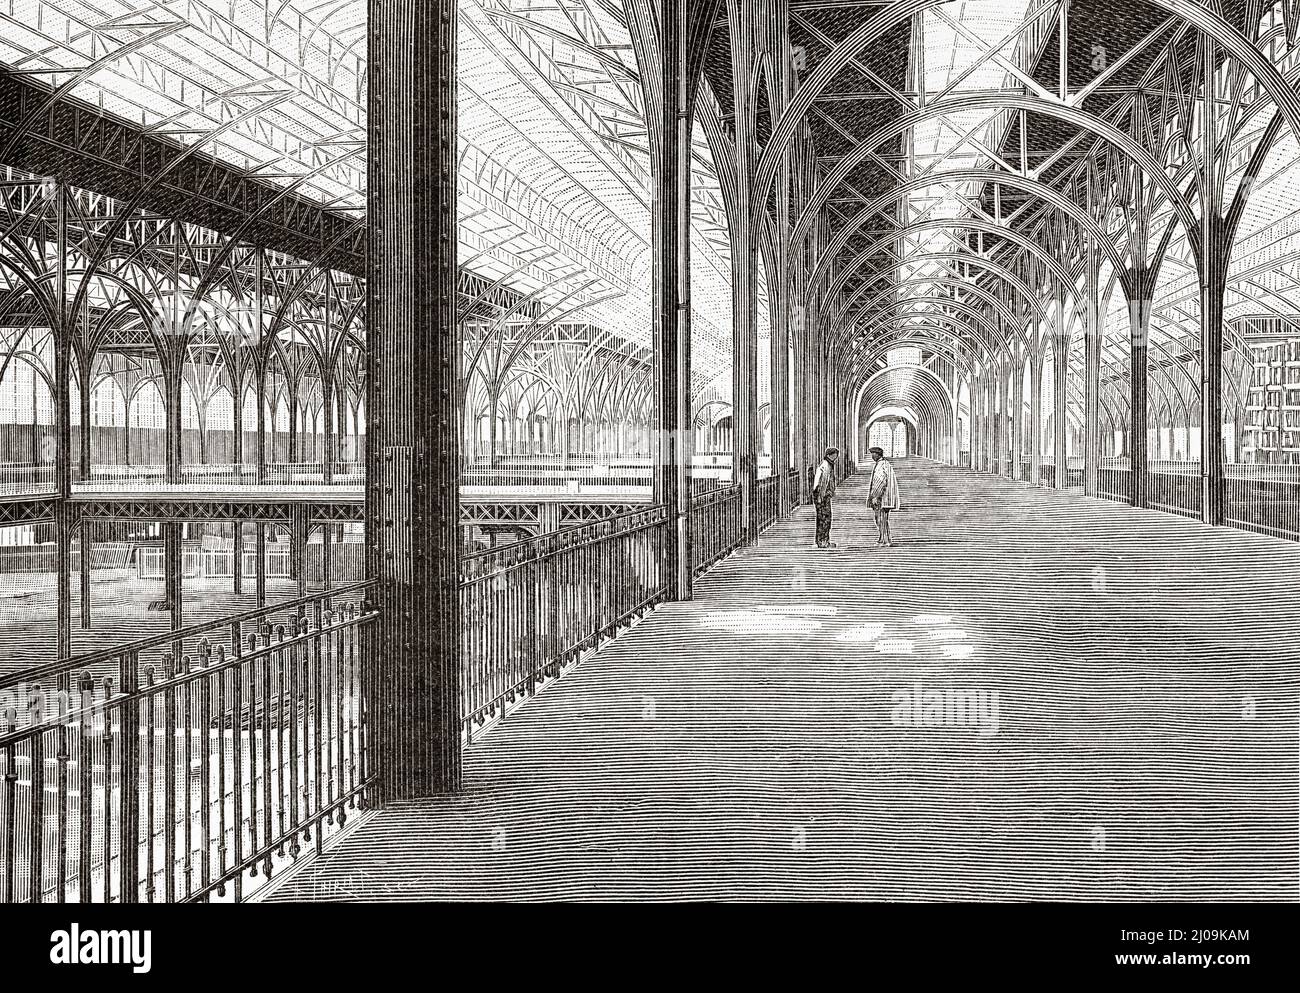 Universal Exhibition 1900 in Paris. Palace of Civil Engineering & Mode of Transport. France, Europe. Old 19th century engraved illustration from La Nature 1899 Stock Photo